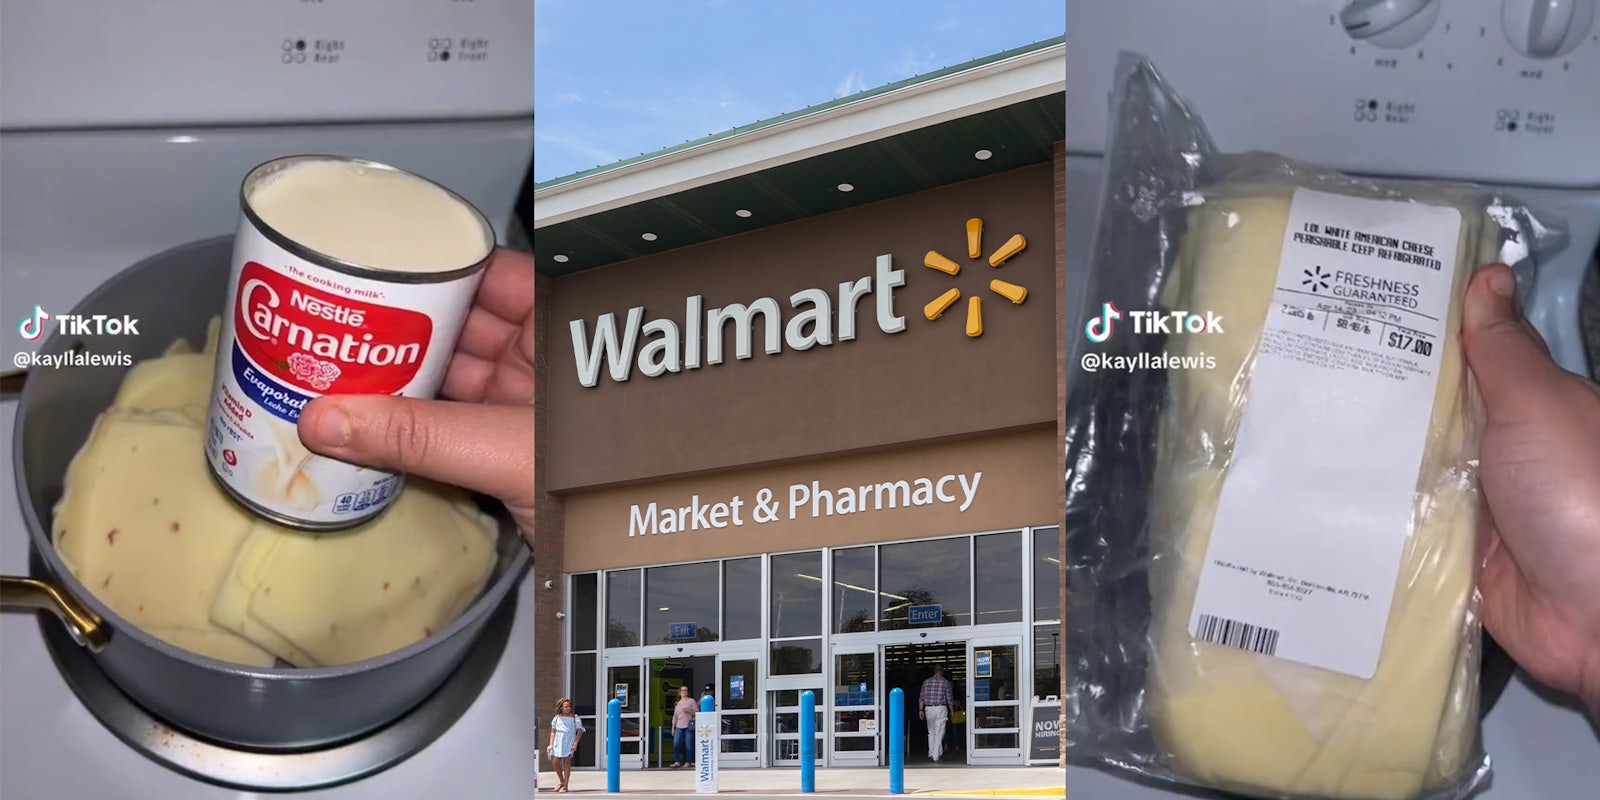 Walmart customer spends almost $40 on ingredients to make queso at home